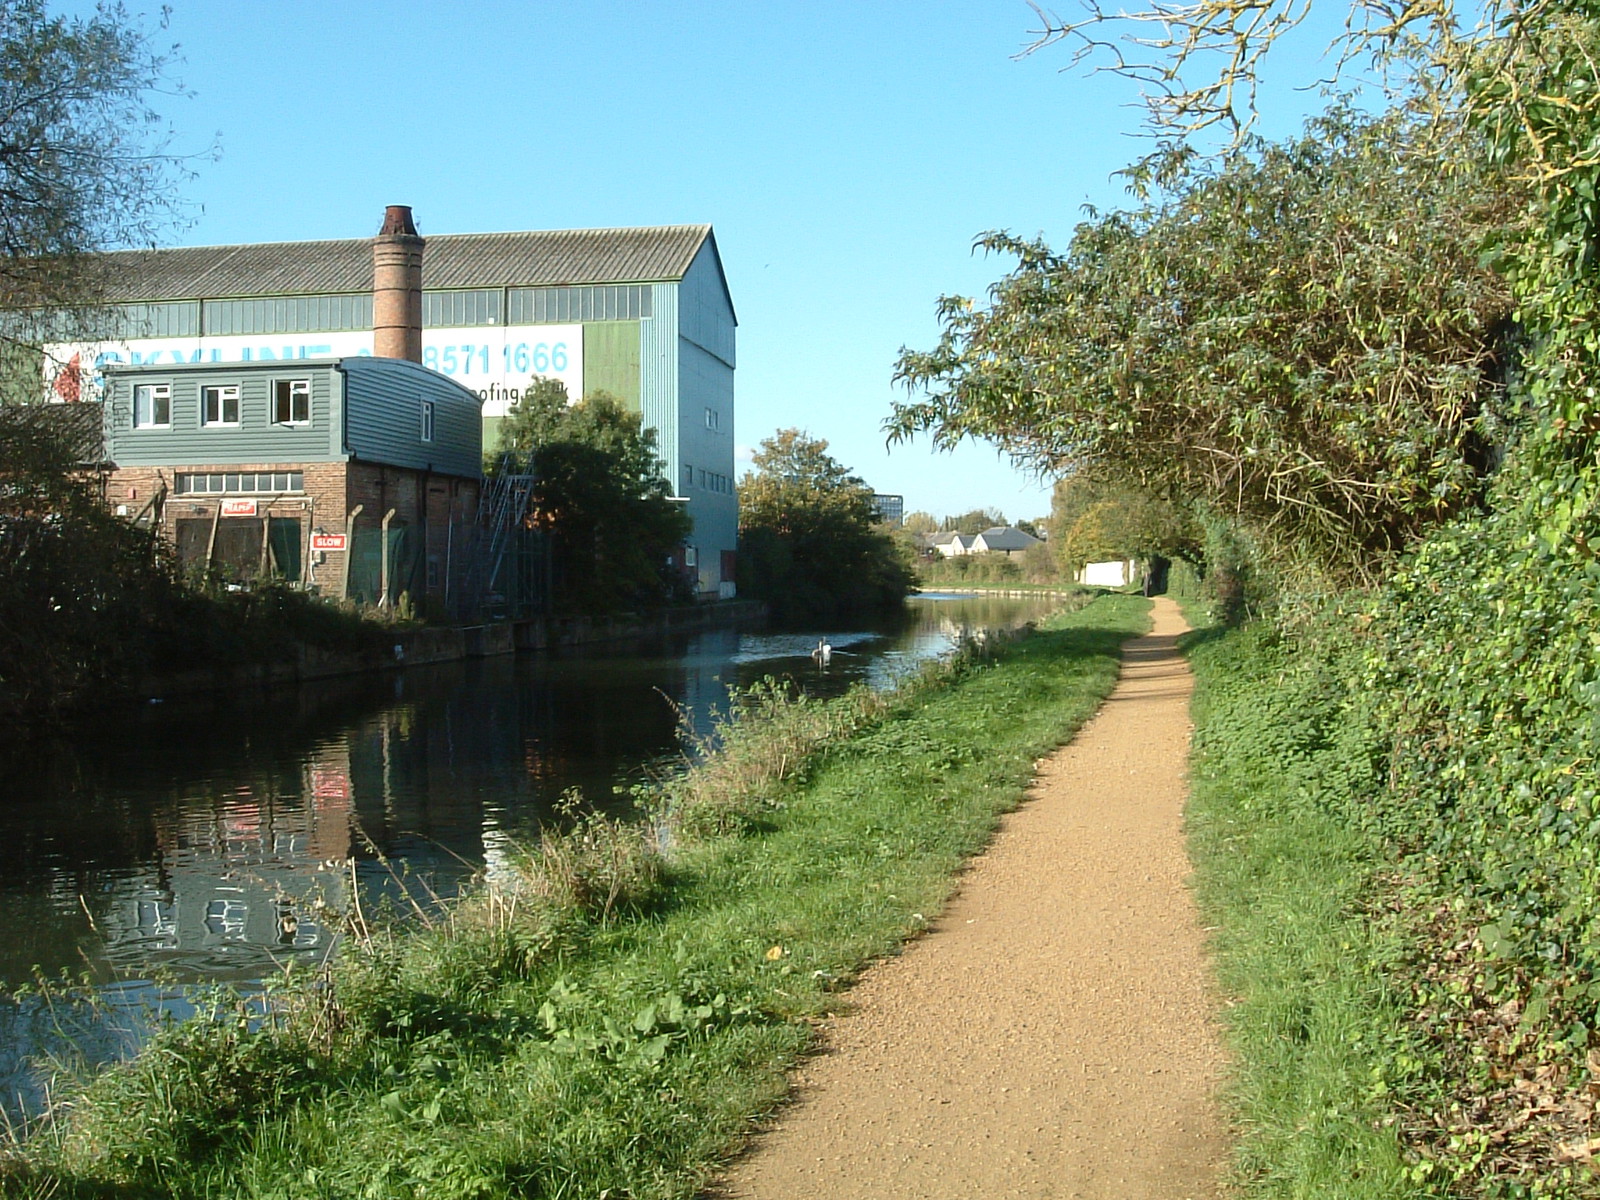 A factory by the Grand Union Canal